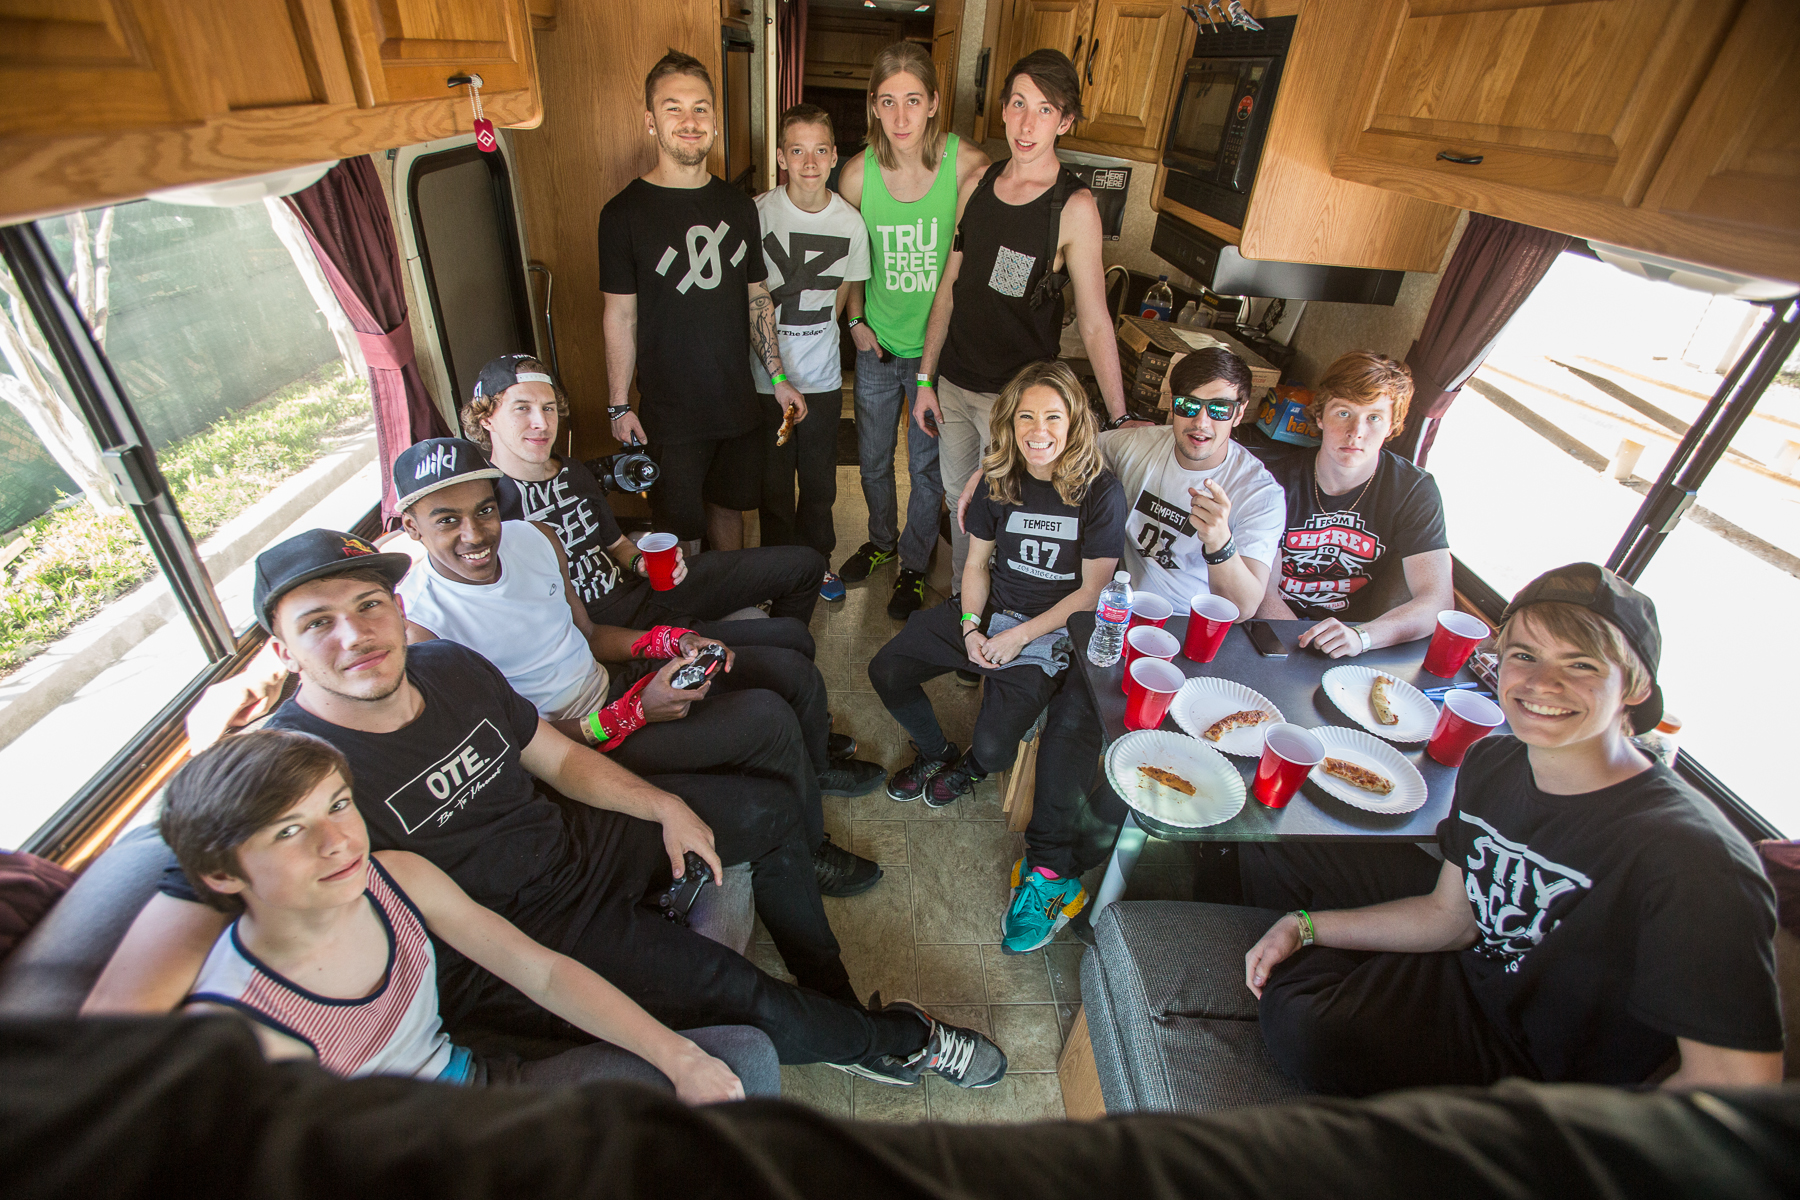 Inside the Tour Bus with fans